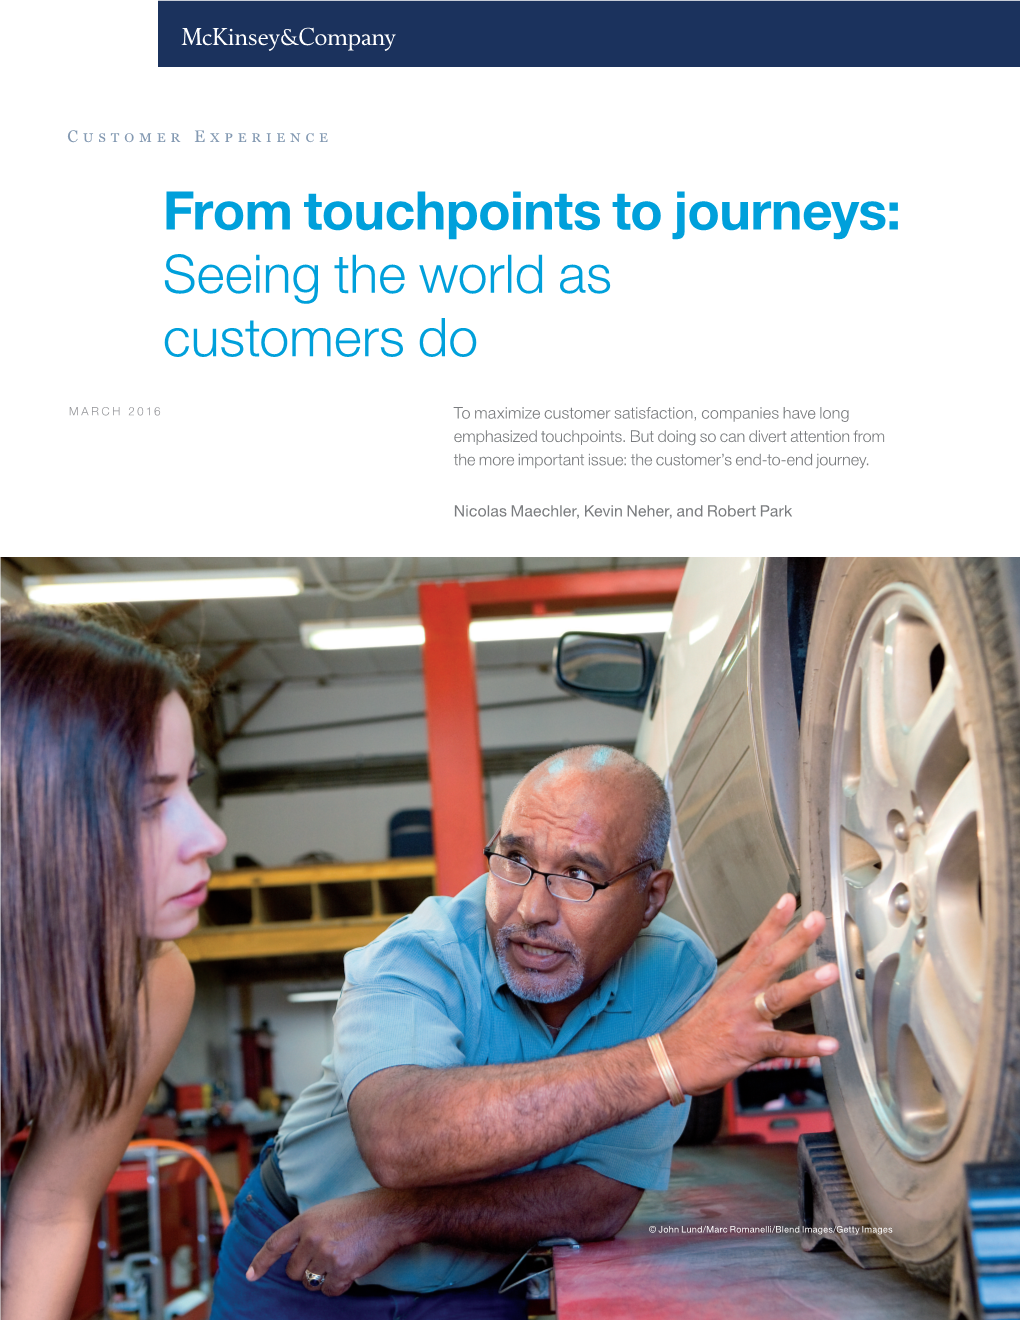 From Touchpoints to Journeys: Seeing the World As Customers Do